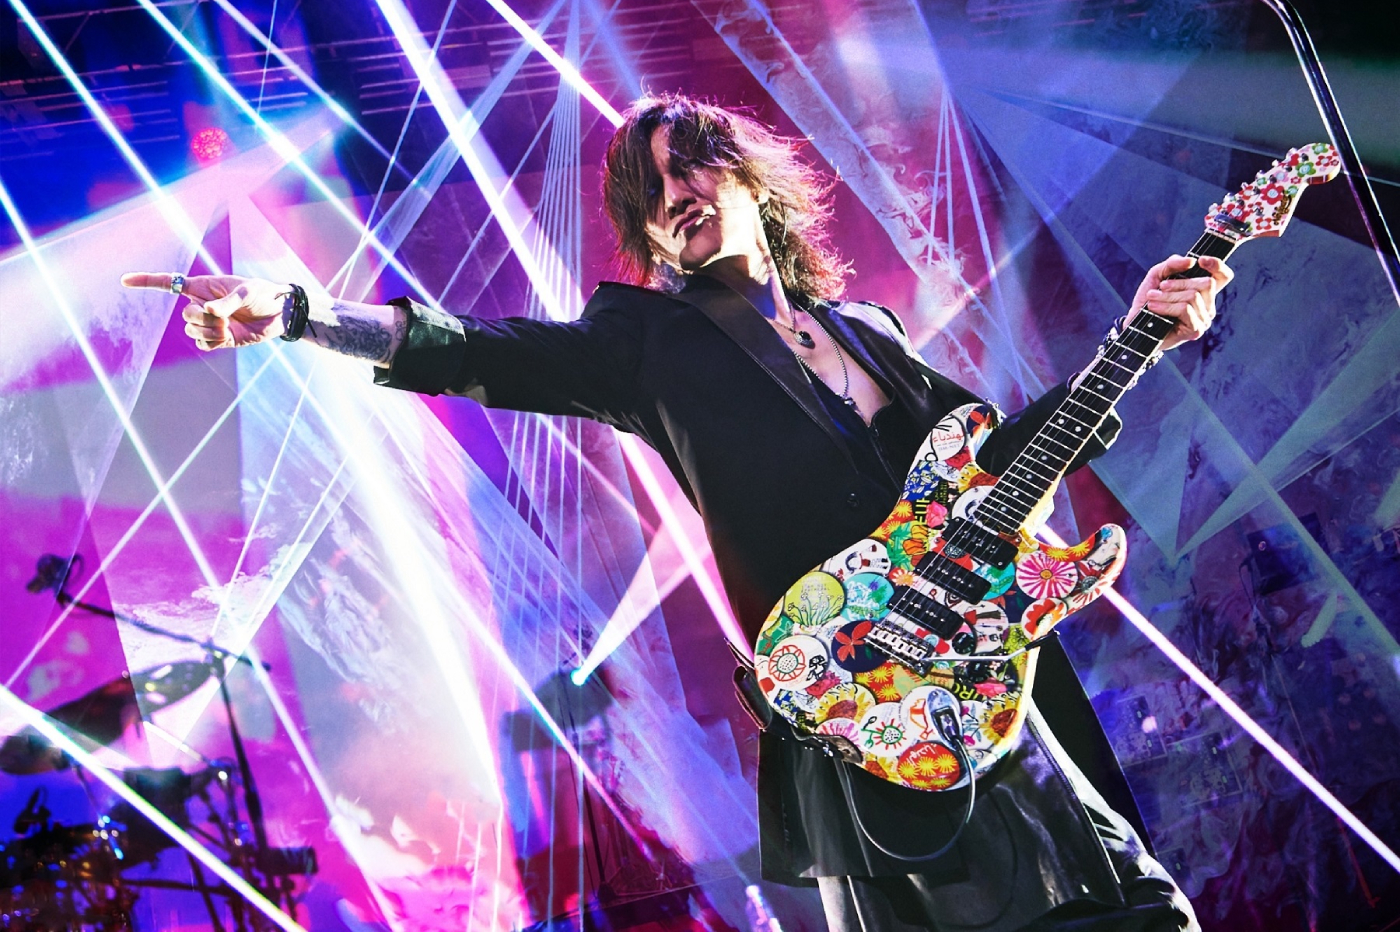 SUGIZO、ソロデビュー25周年記念ライブDISC『And The Chaos is Killing Me』リリース決定！ ツアー日程も発表